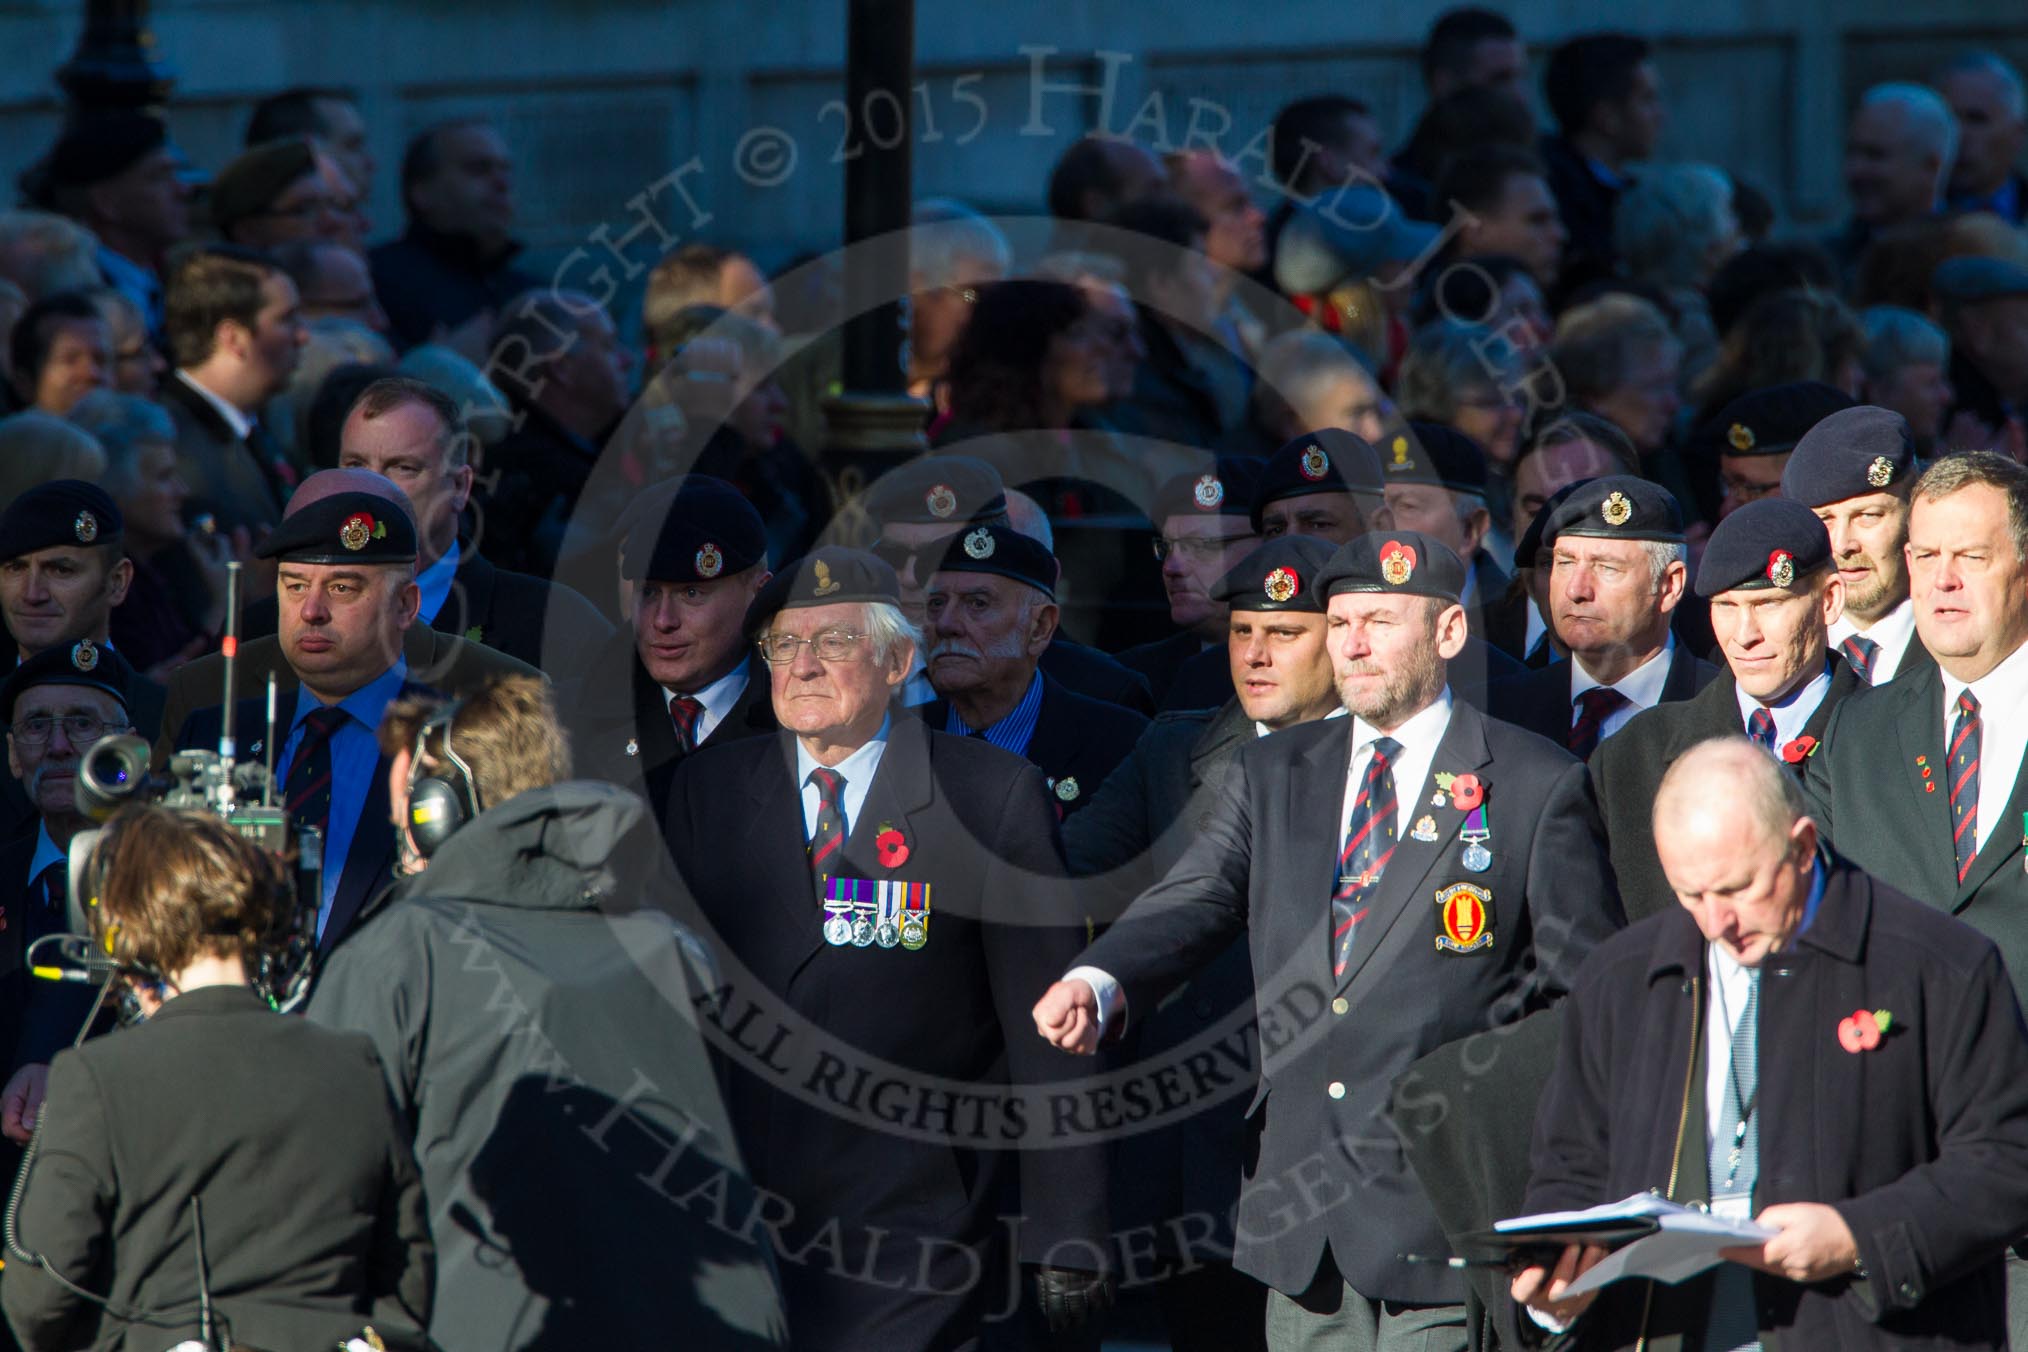 Remembrance Sunday Cenotaph March Past 2013: B21 - Royal Engineers Bomb Disposal Association..
Press stand opposite the Foreign Office building, Whitehall, London SW1,
London,
Greater London,
United Kingdom,
on 10 November 2013 at 12:02, image #1470